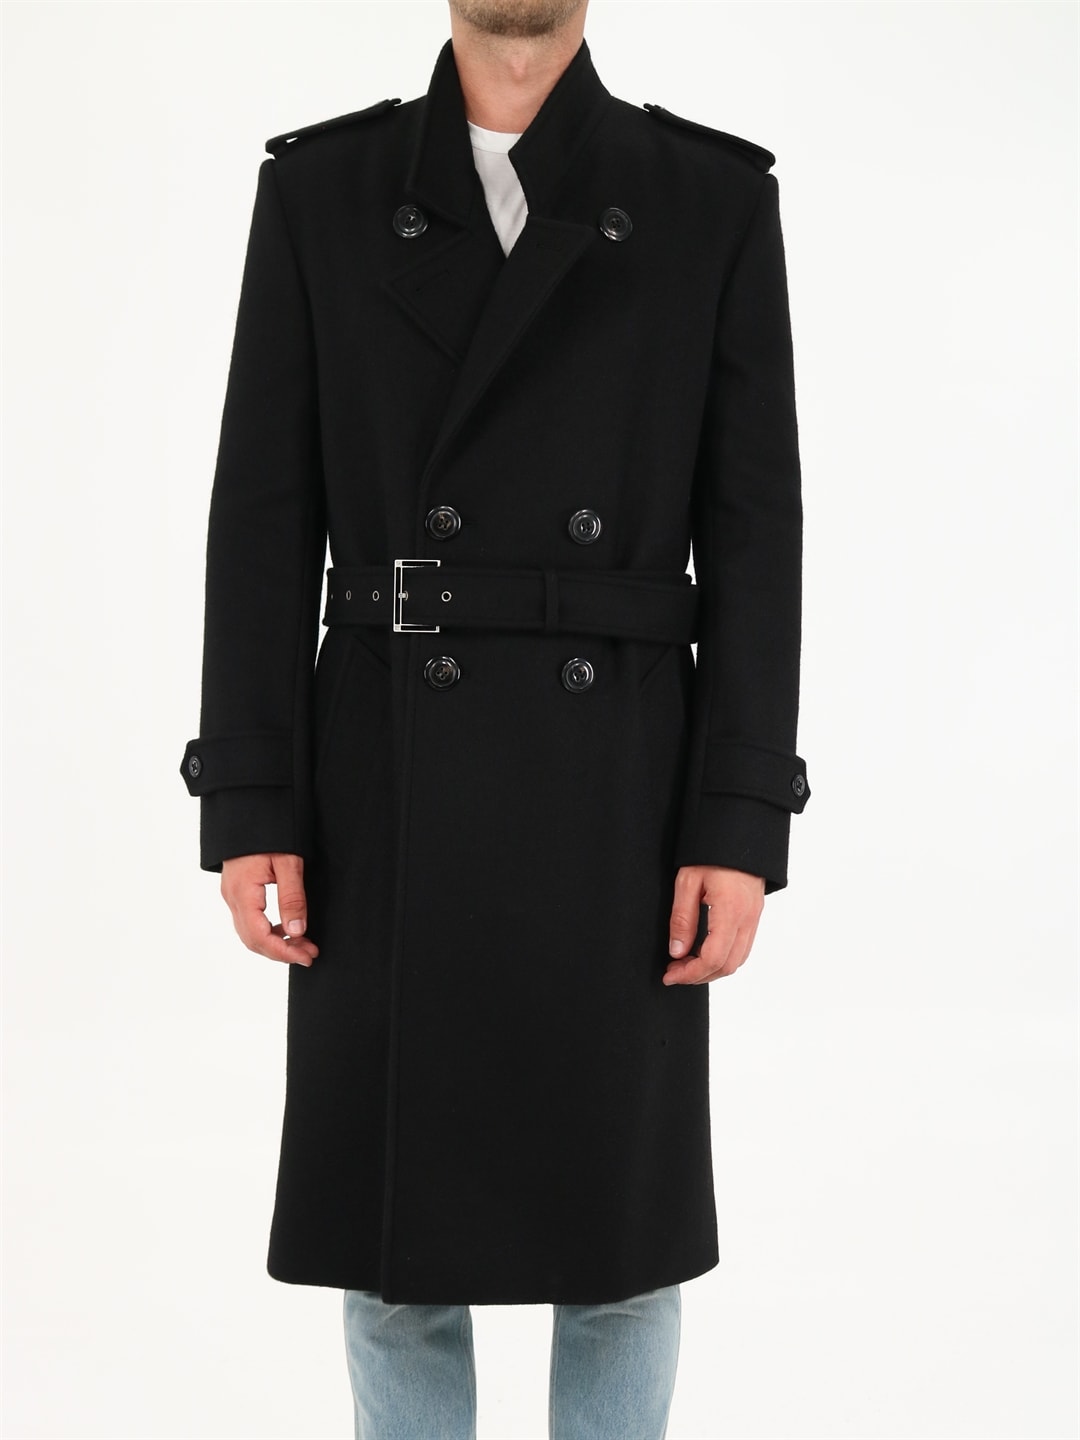 SAINT LAURENT DOUBLE-BREASTED TRENCH COAT IN WOOL FELT,661454Y2D271000